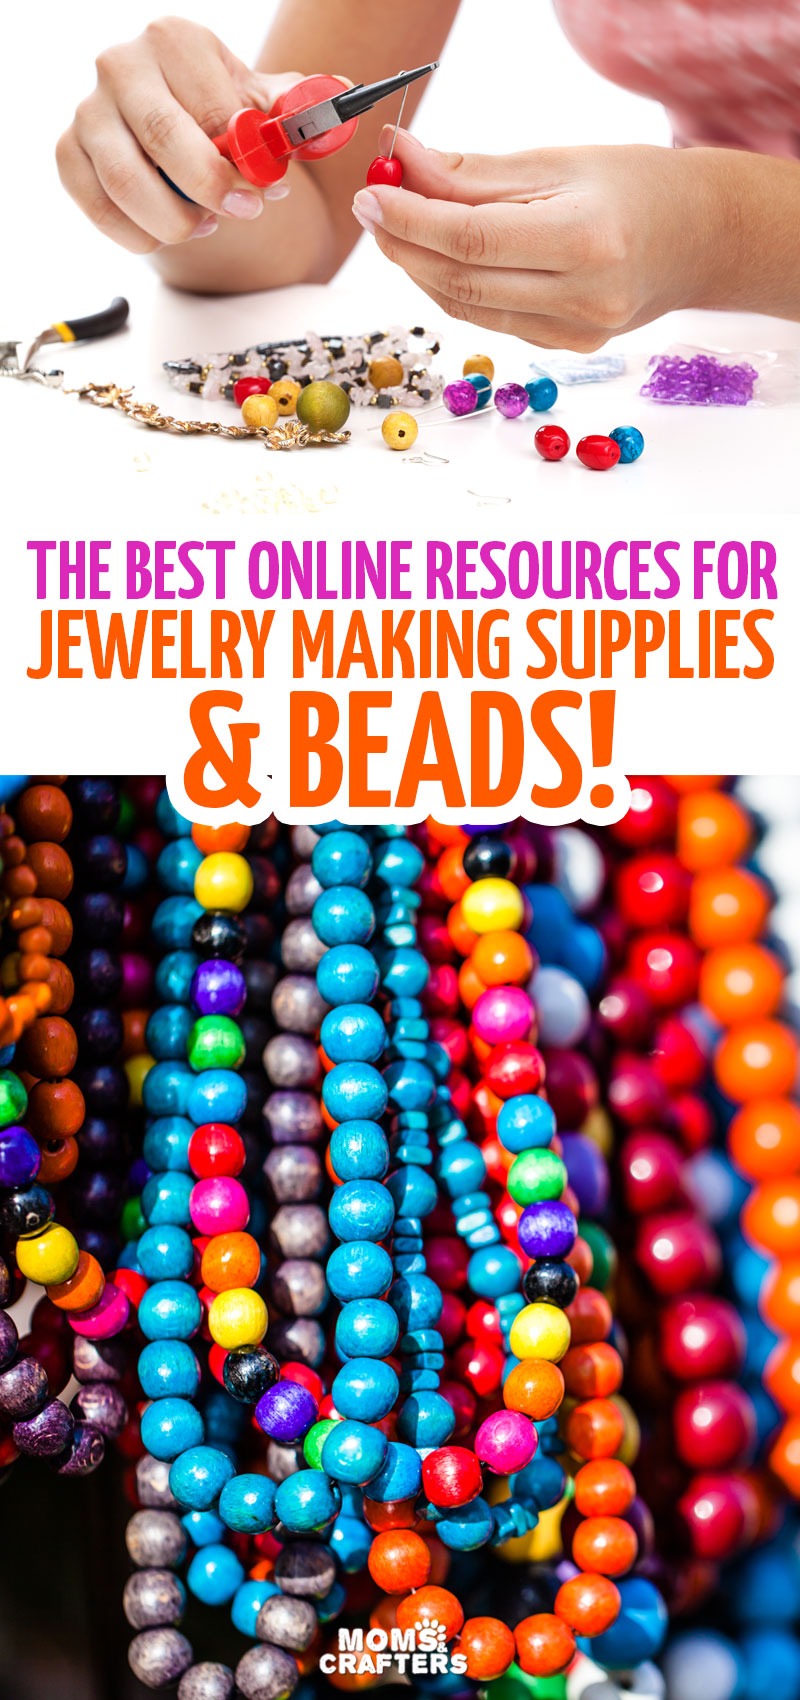 Why You Should Buy Wholesale Beads